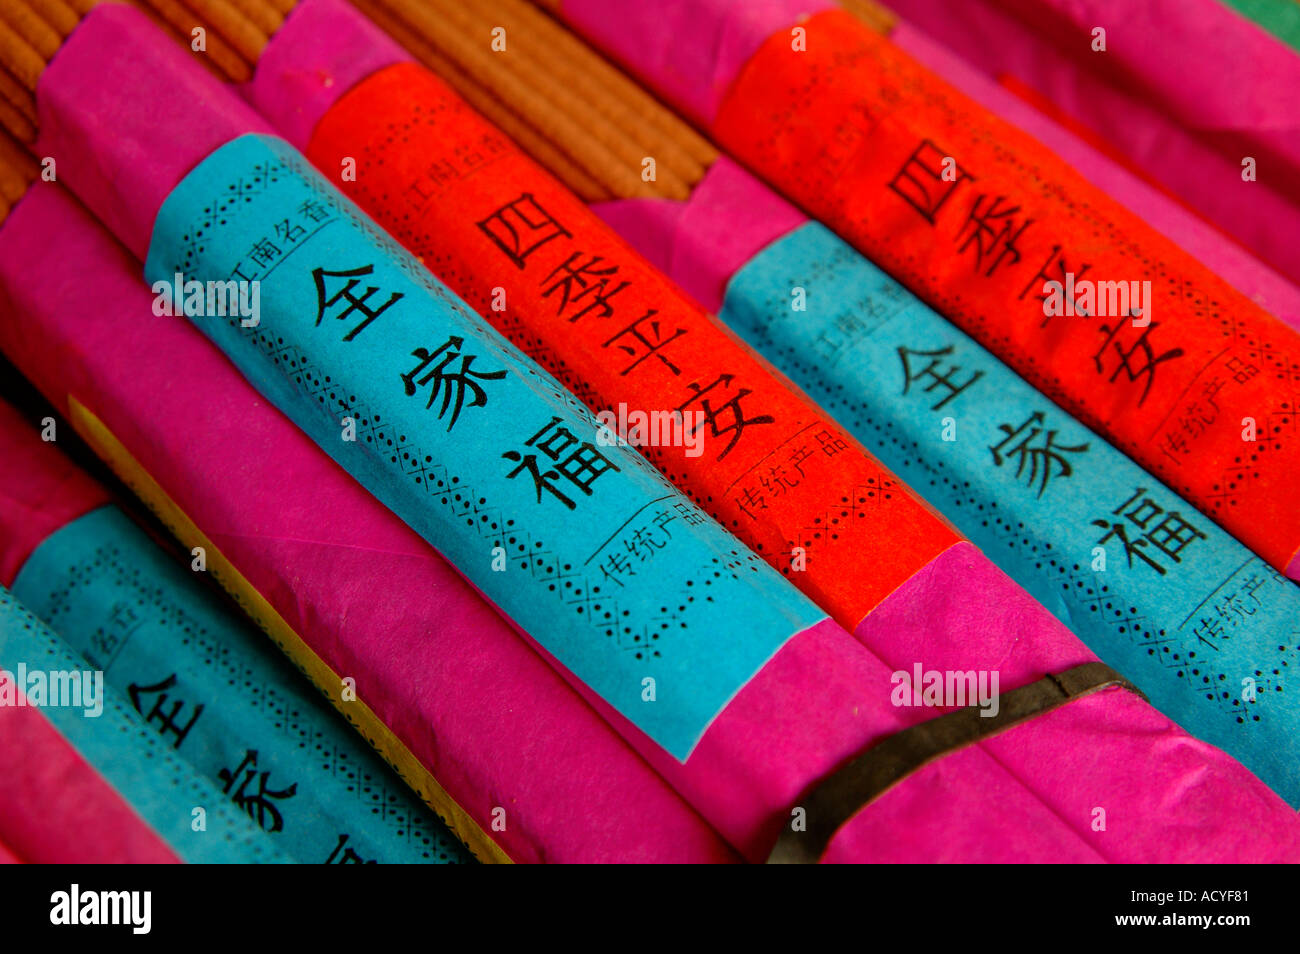 Packs of incense sticks wrapped in pink paper. For sale at market in Suzhou, China. Stock Photo